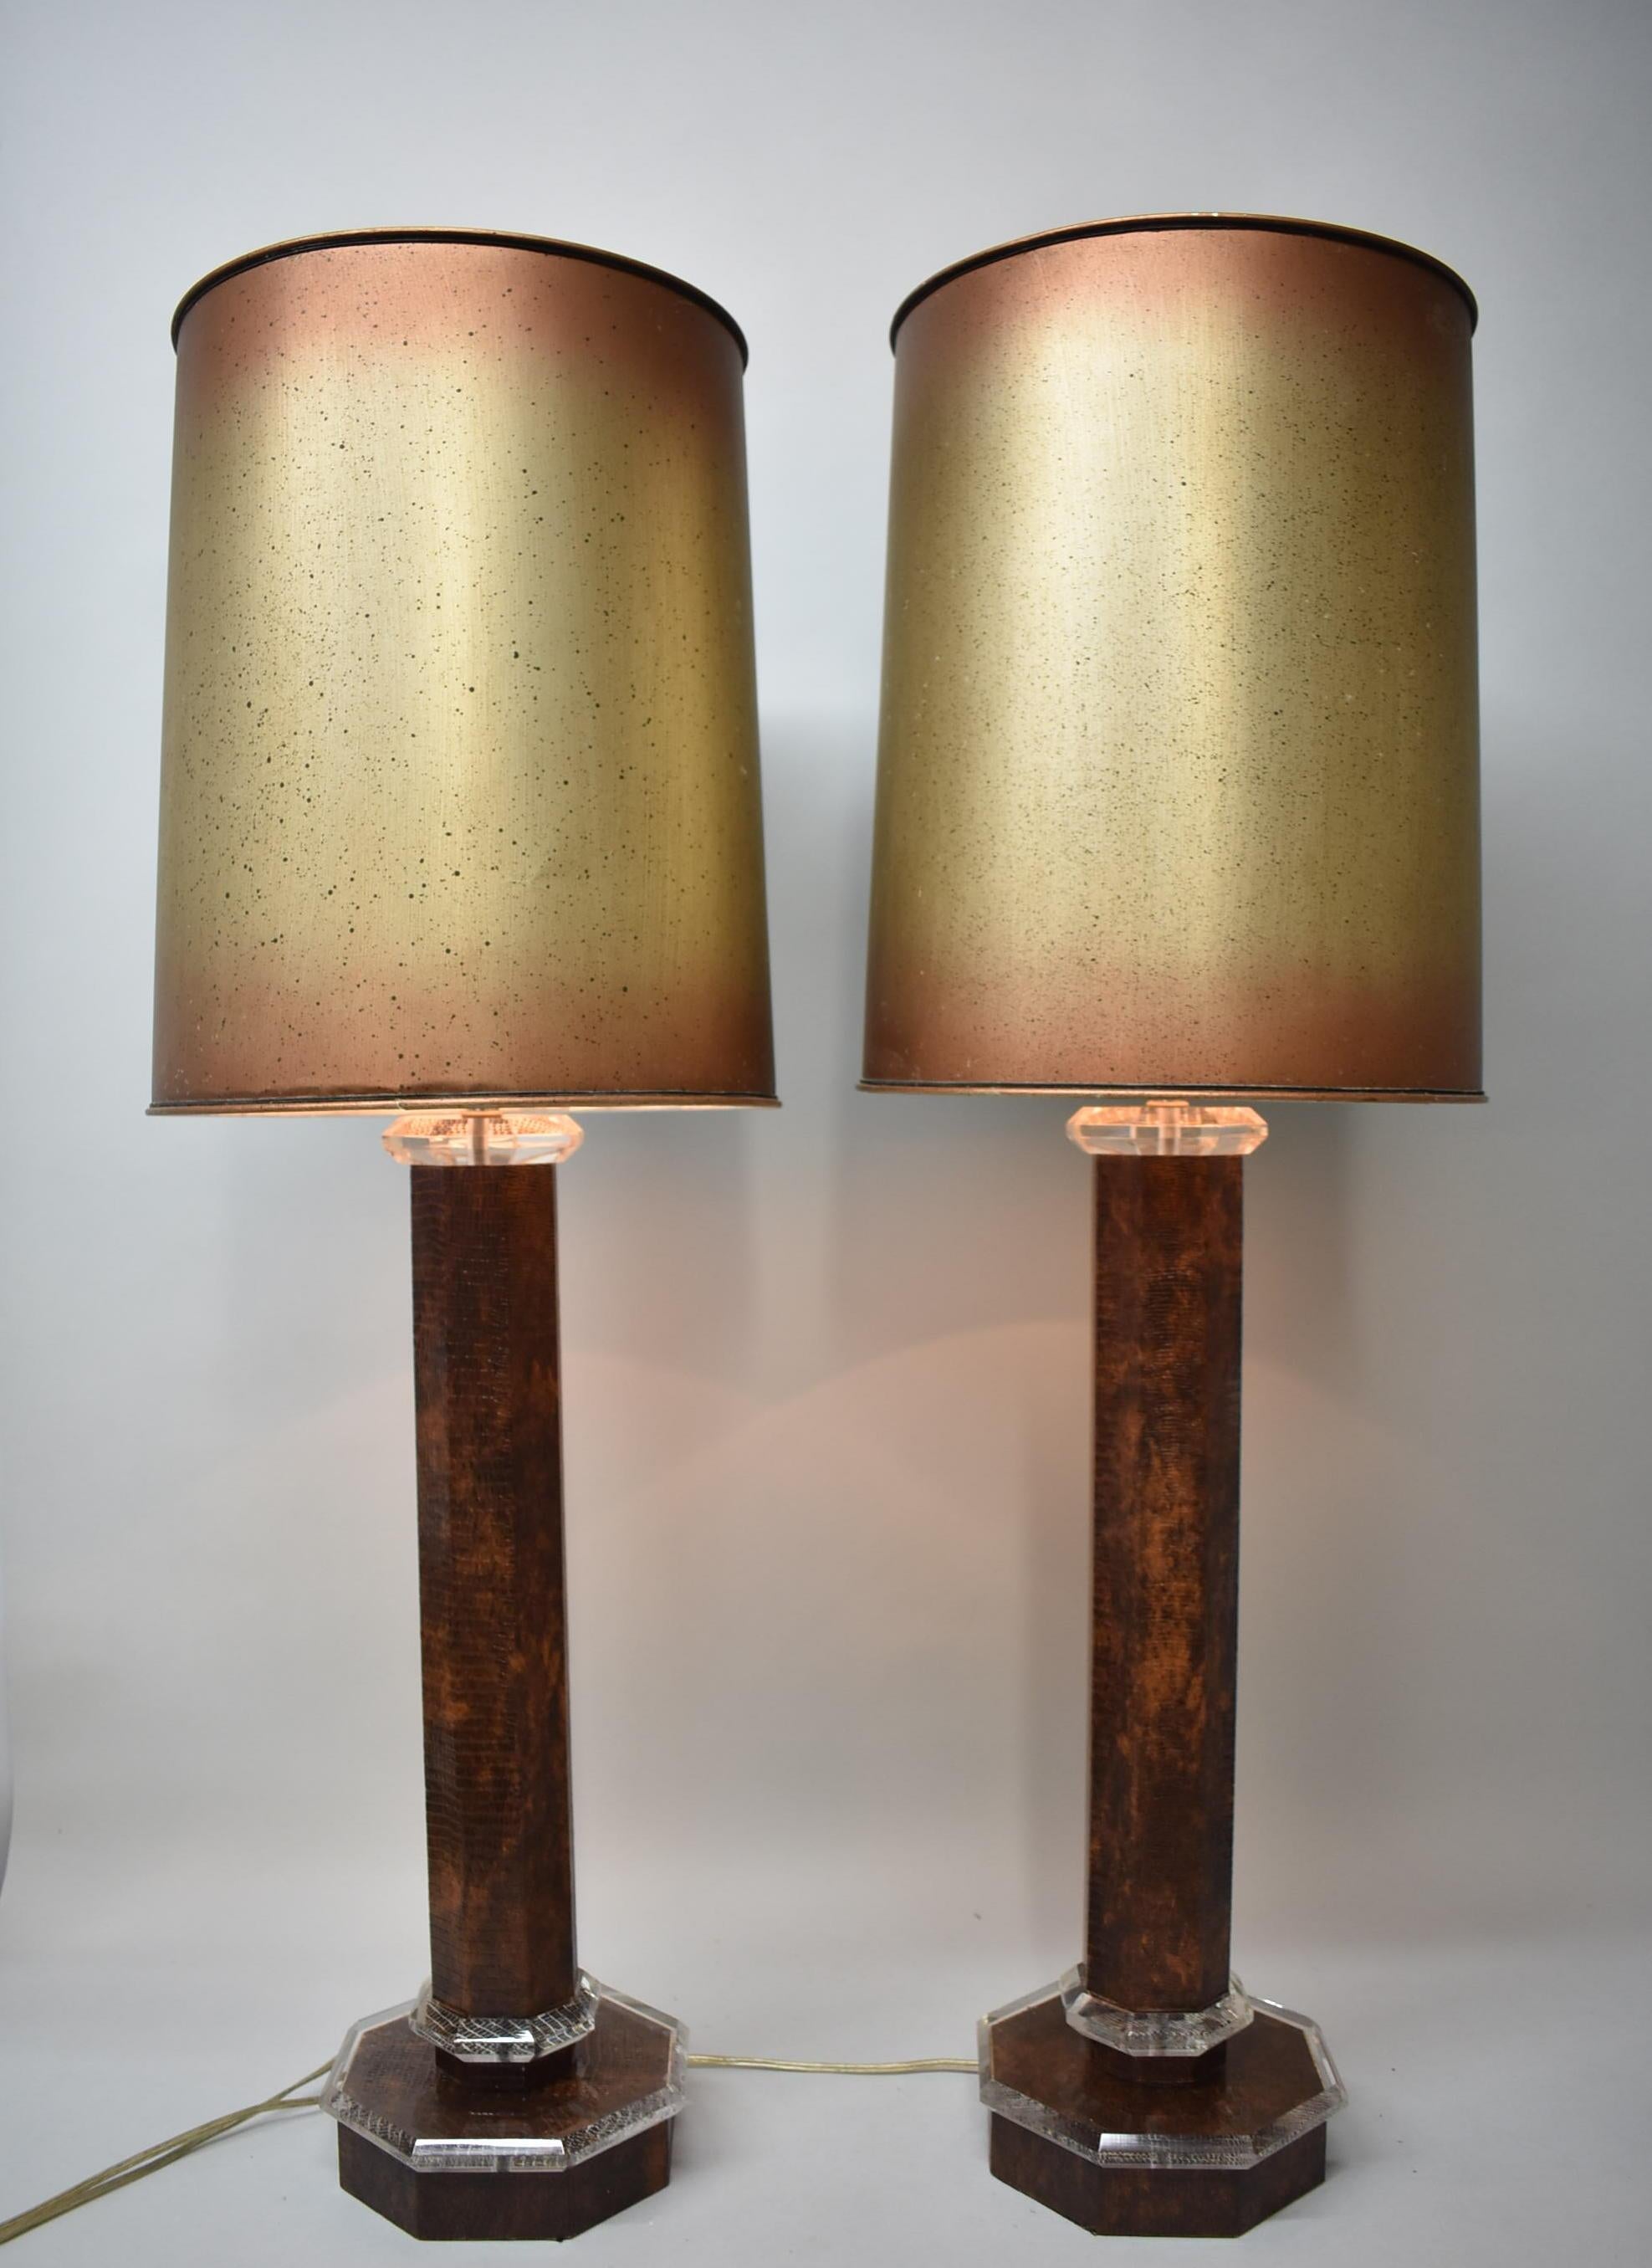 Pair of faux leather / whip snake skin and Lucite table lamps attributed to Karl Springer. Heptagon column base.